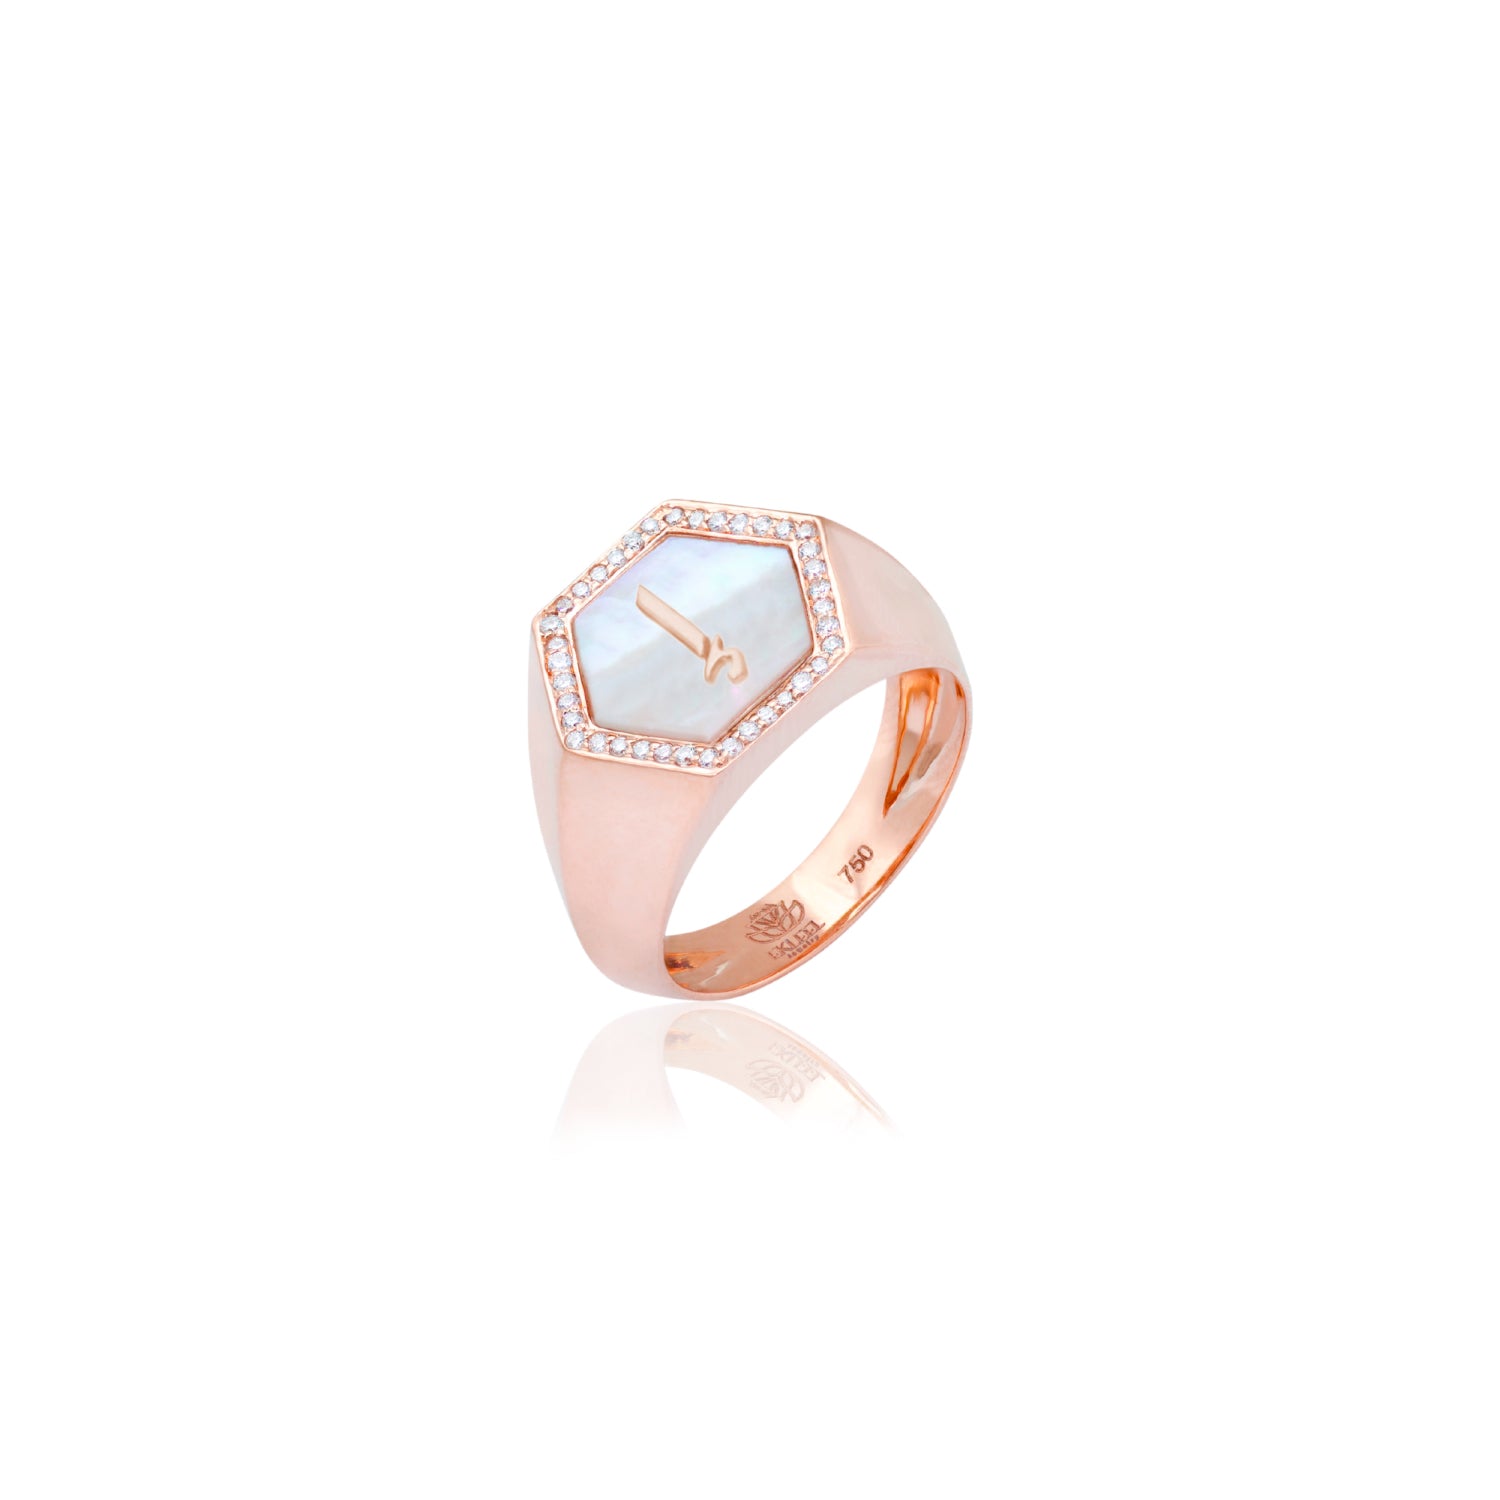 Qamoos 2.0 Letter إ White Mother of Pearl and Diamond Signet Ring in Rose Gold